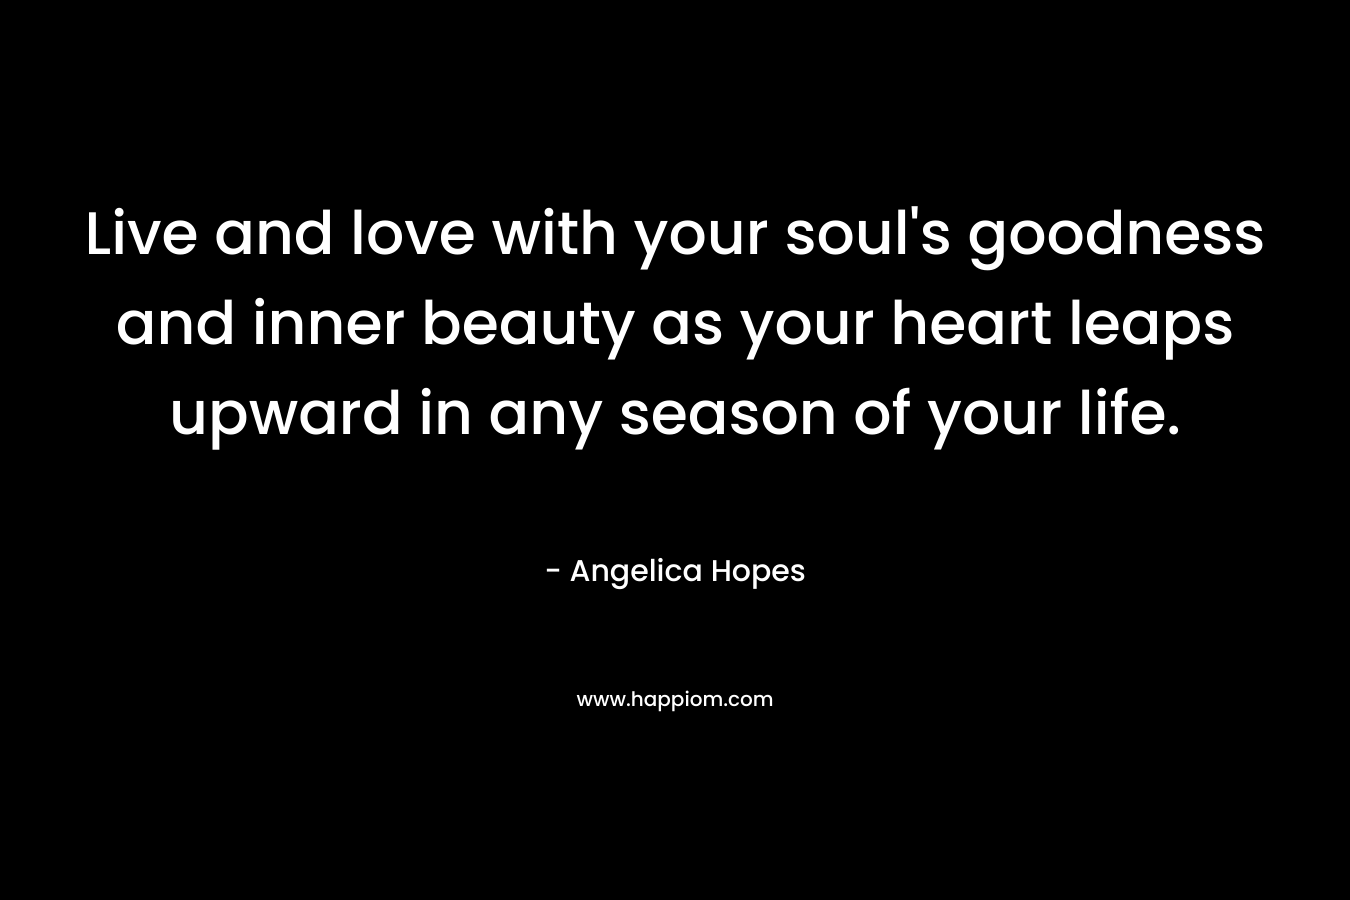 Live and love with your soul’s goodness and inner beauty as your heart leaps upward in any season of your life. – Angelica Hopes